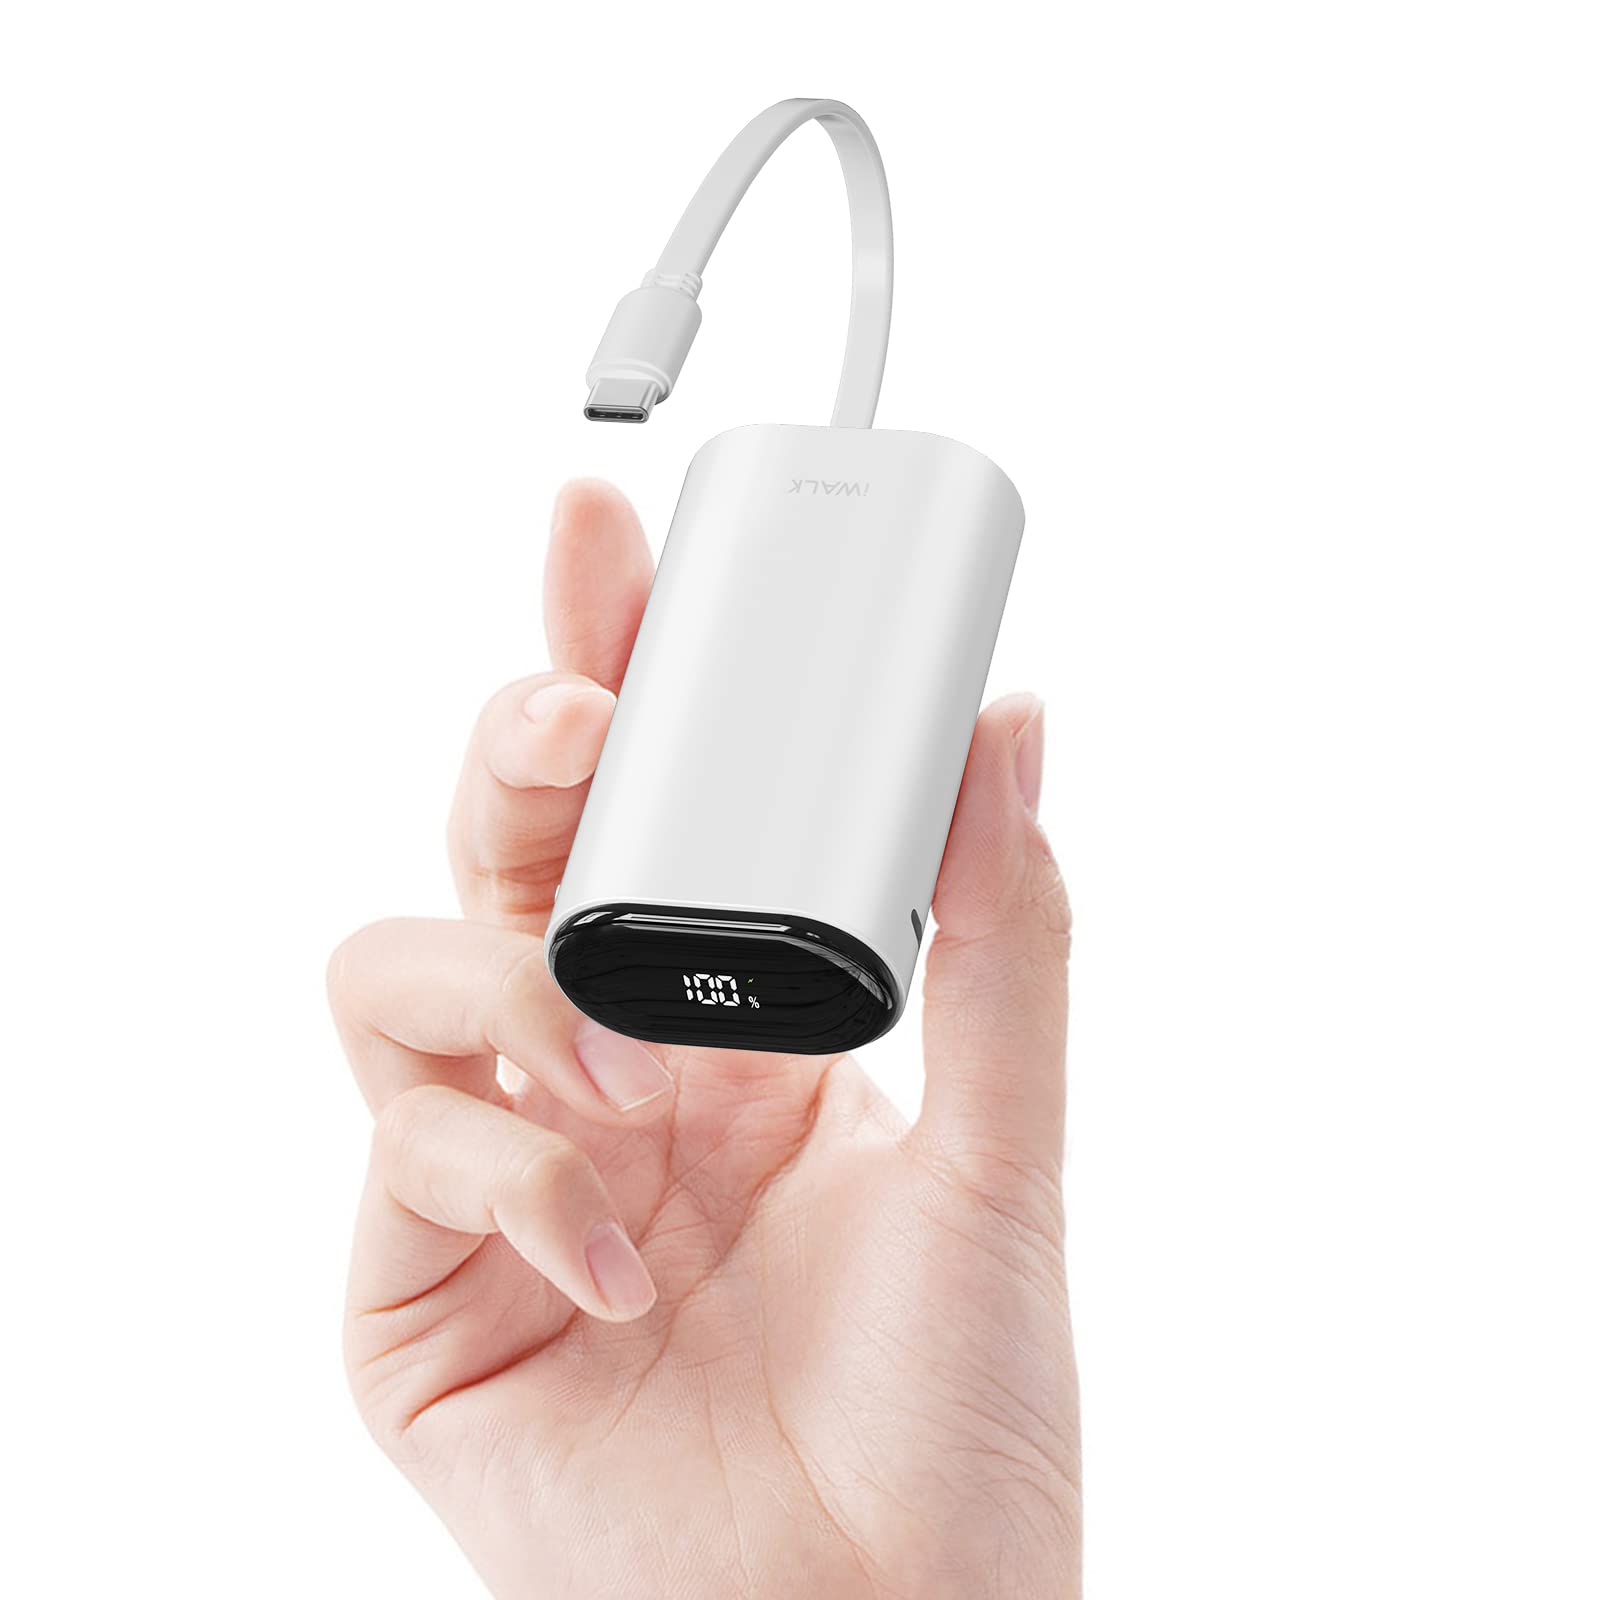 iWALK LinkPod Y2 Portable Charger USB-C with Built-in 18W PD Fast Charging Cable & LED Display, 9600mAh $17.49